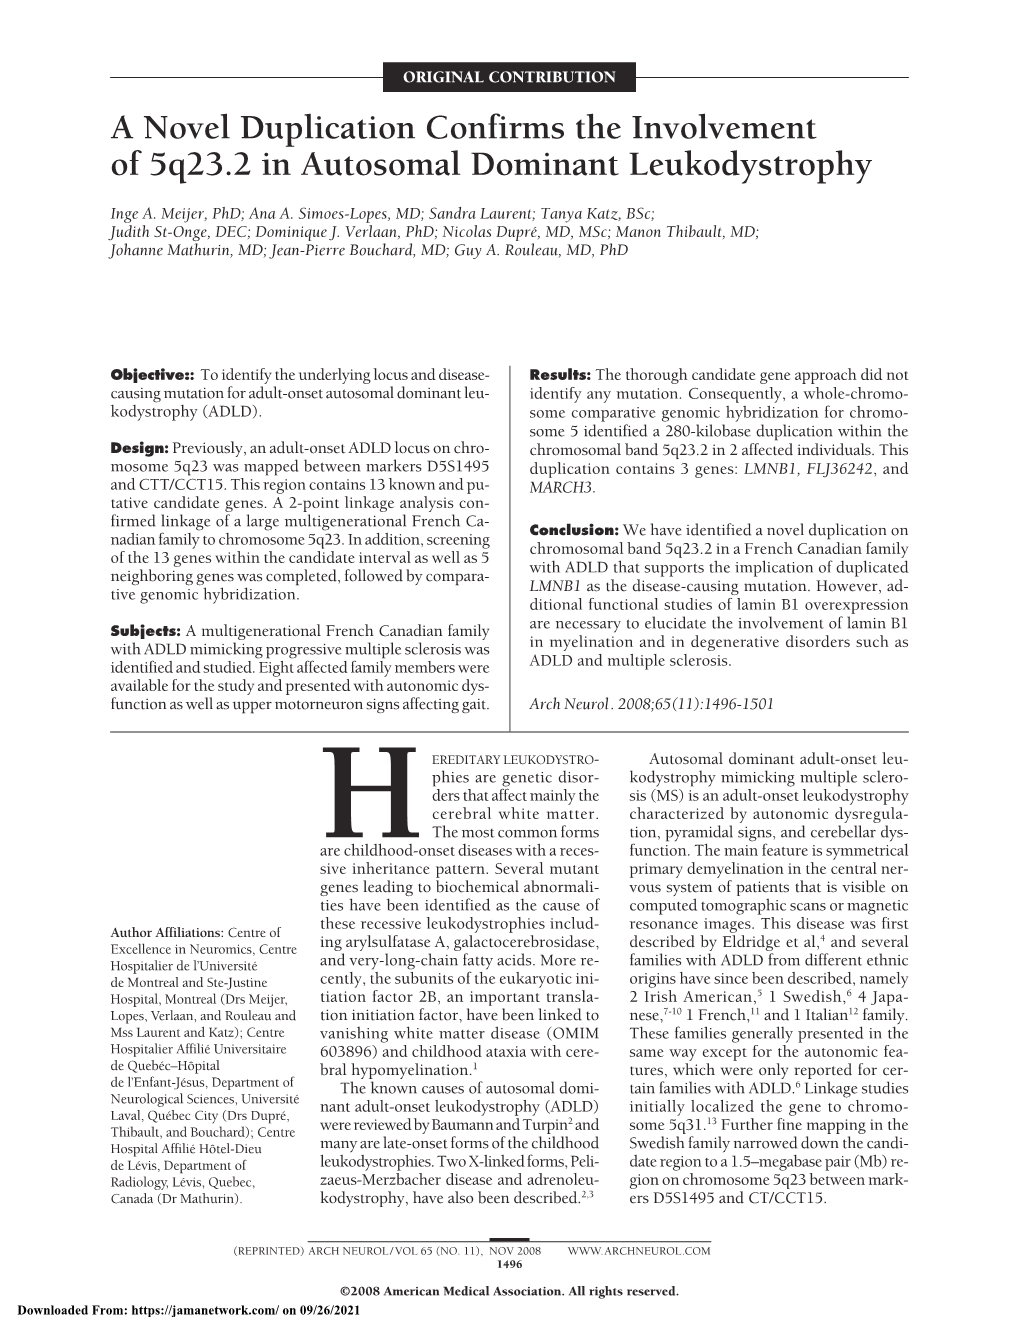 A Novel Duplication Confirms the Involvement of 5Q23.2 in Autosomal Dominant Leukodystrophy